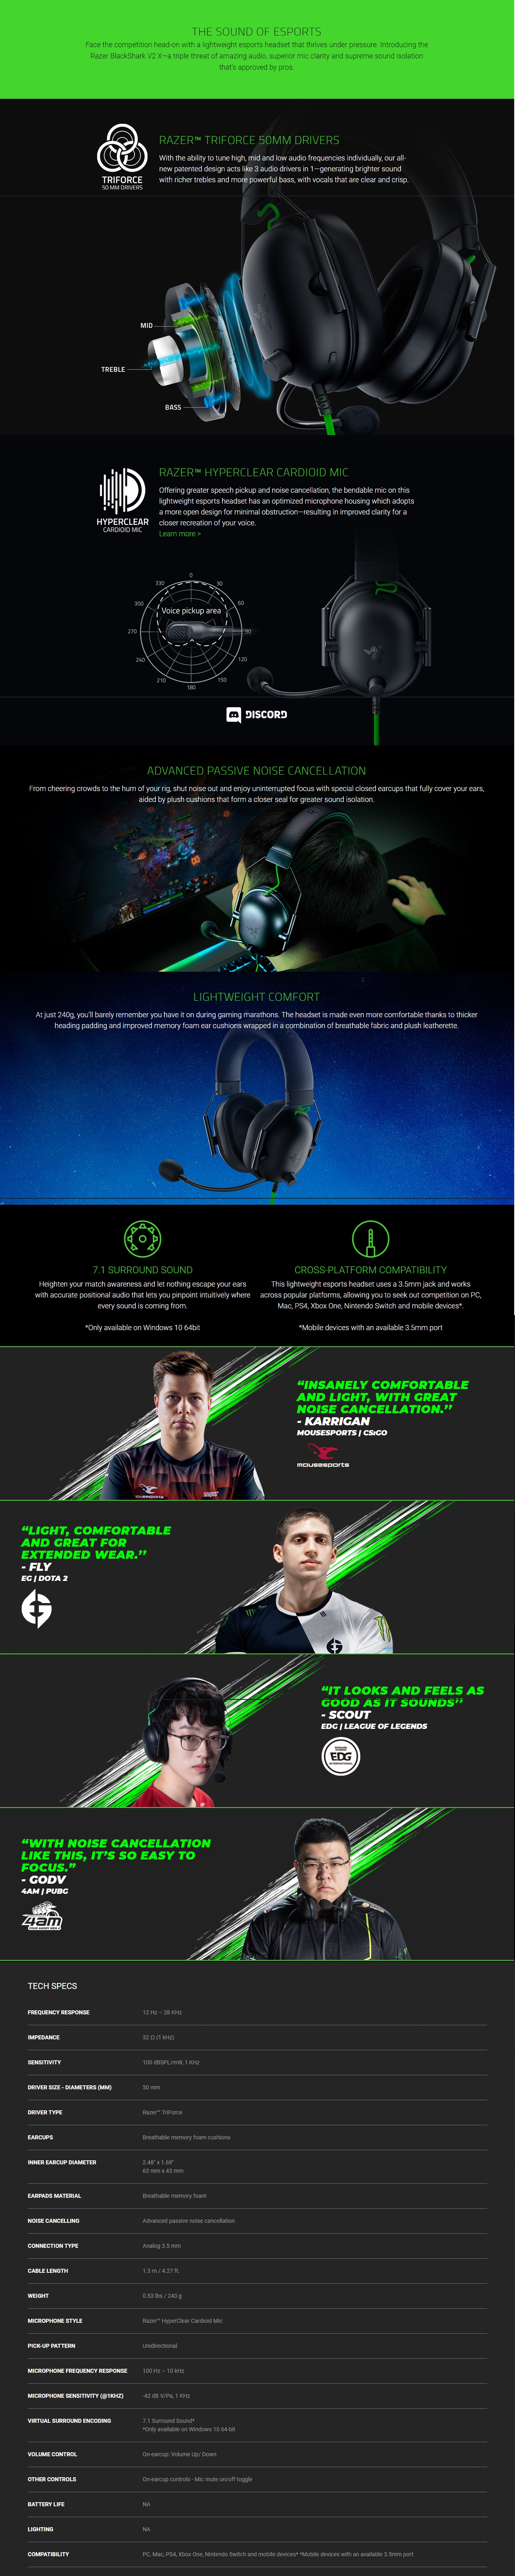 A large marketing image providing additional information about the product Razer BlackShark V2 X - Wired Gaming Headset - Additional alt info not provided